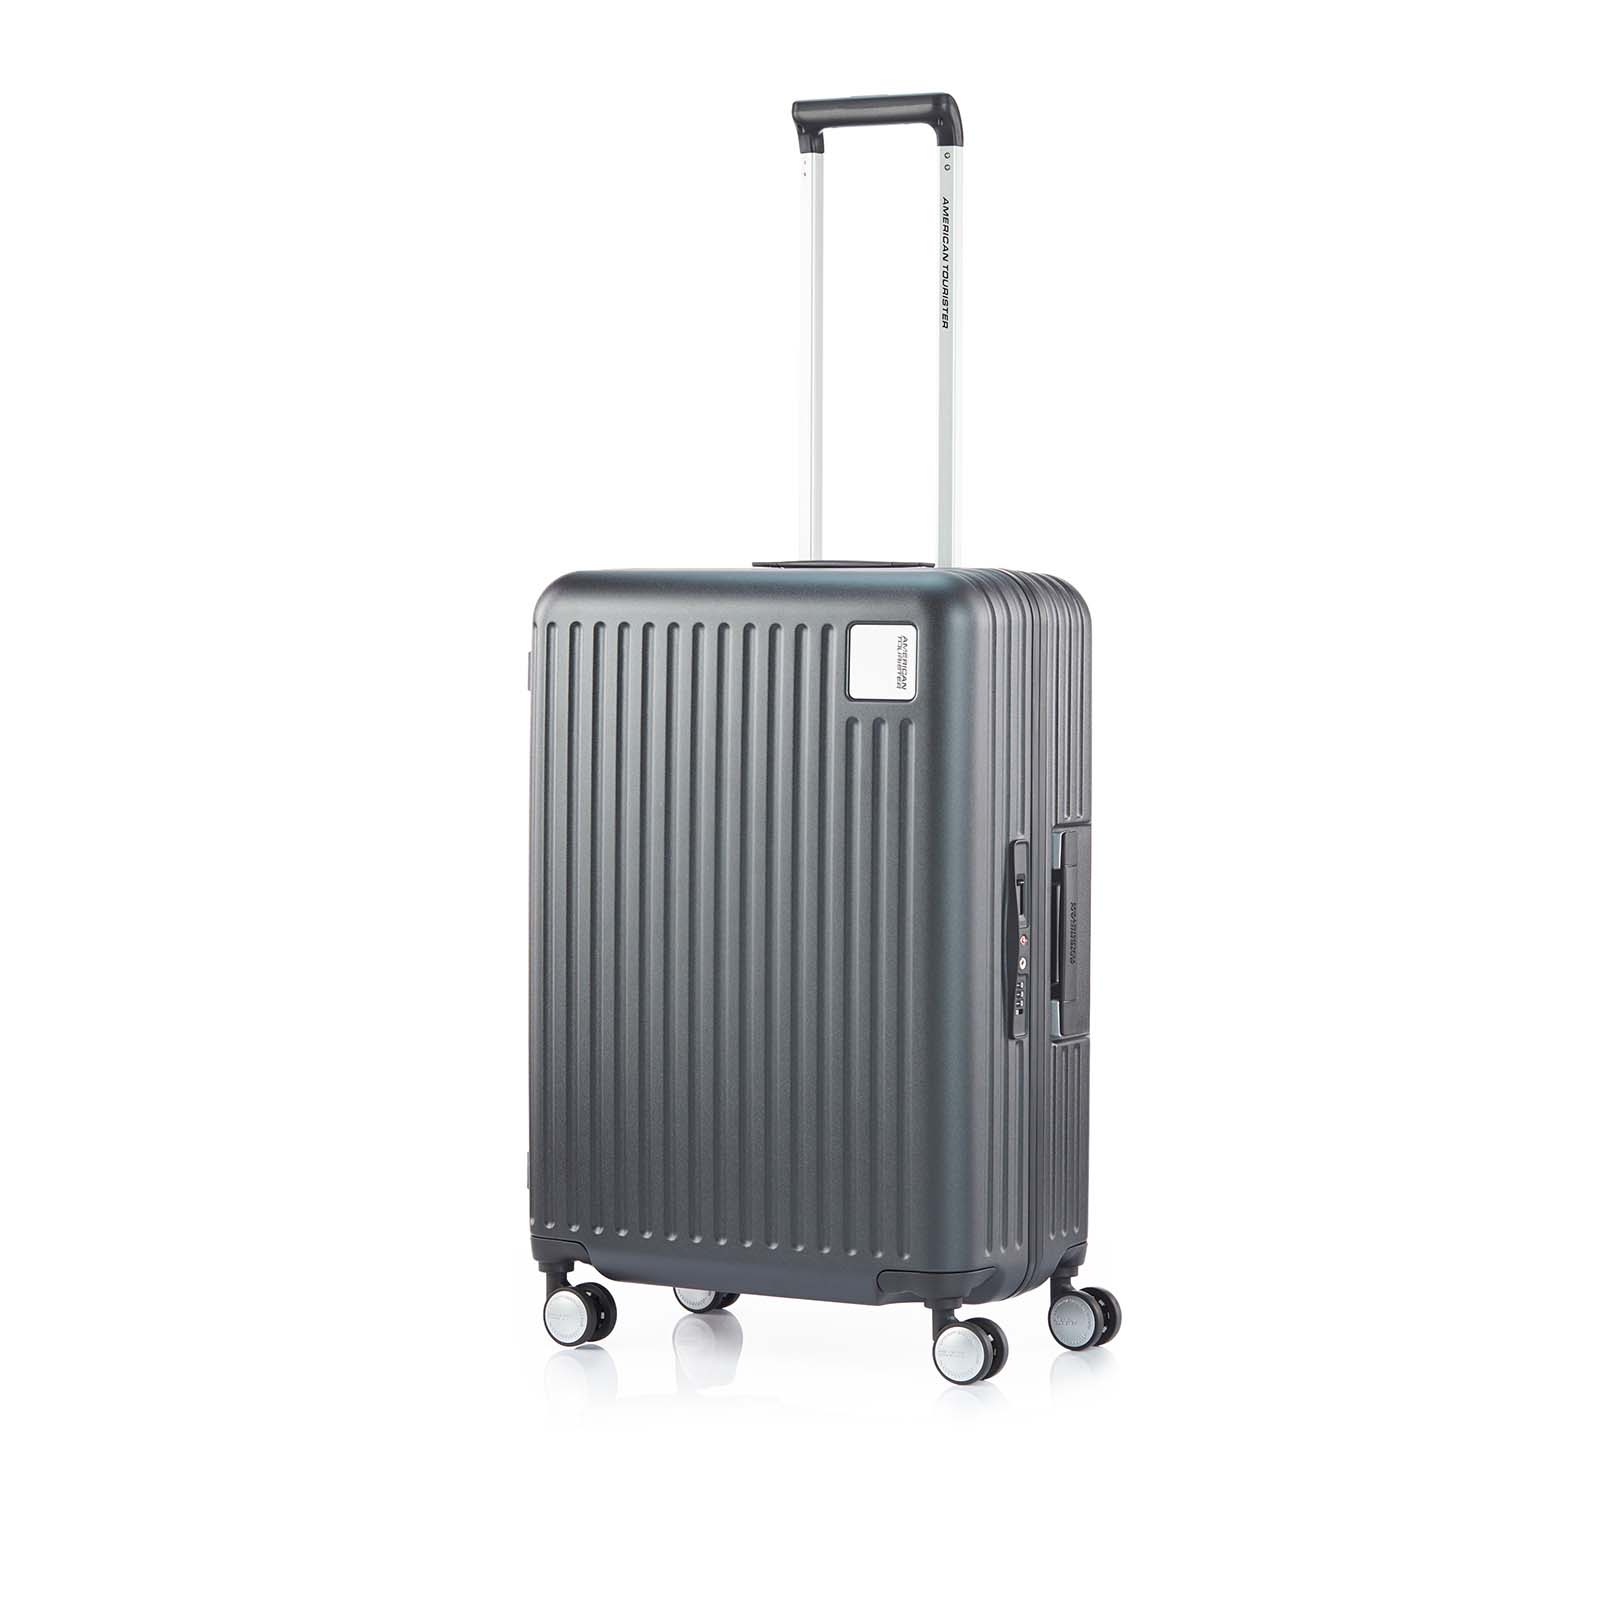 American-Tourister-Lockation-65cm-Suitcase-Black-Front-Angle